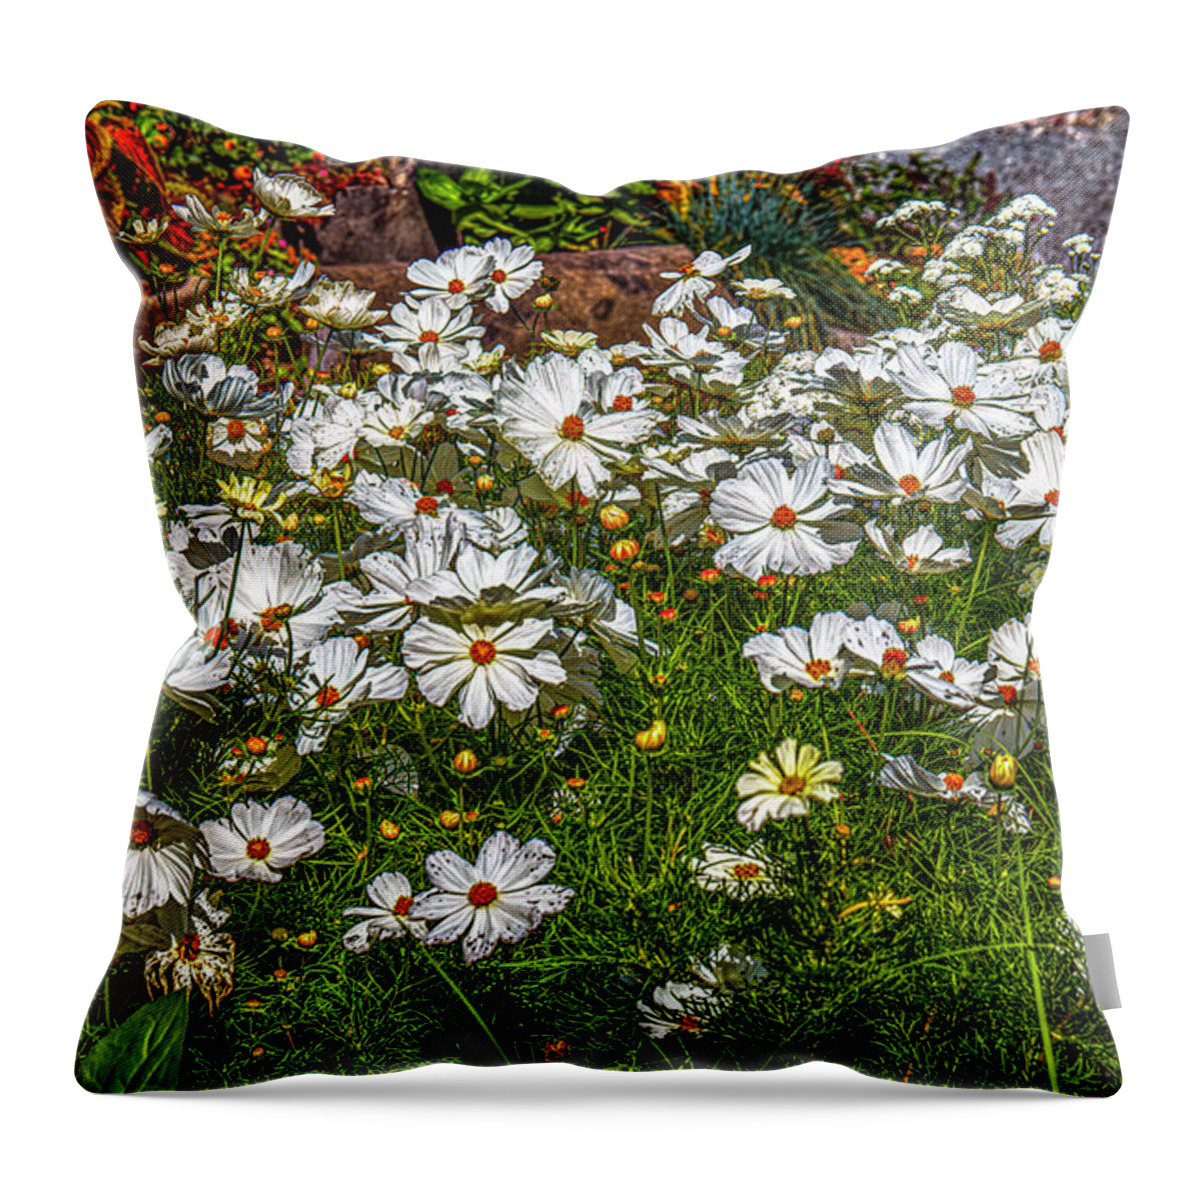 They Come In Groups Throw Pillow featuring the photograph They Come In Groups #i9 by Leif Sohlman